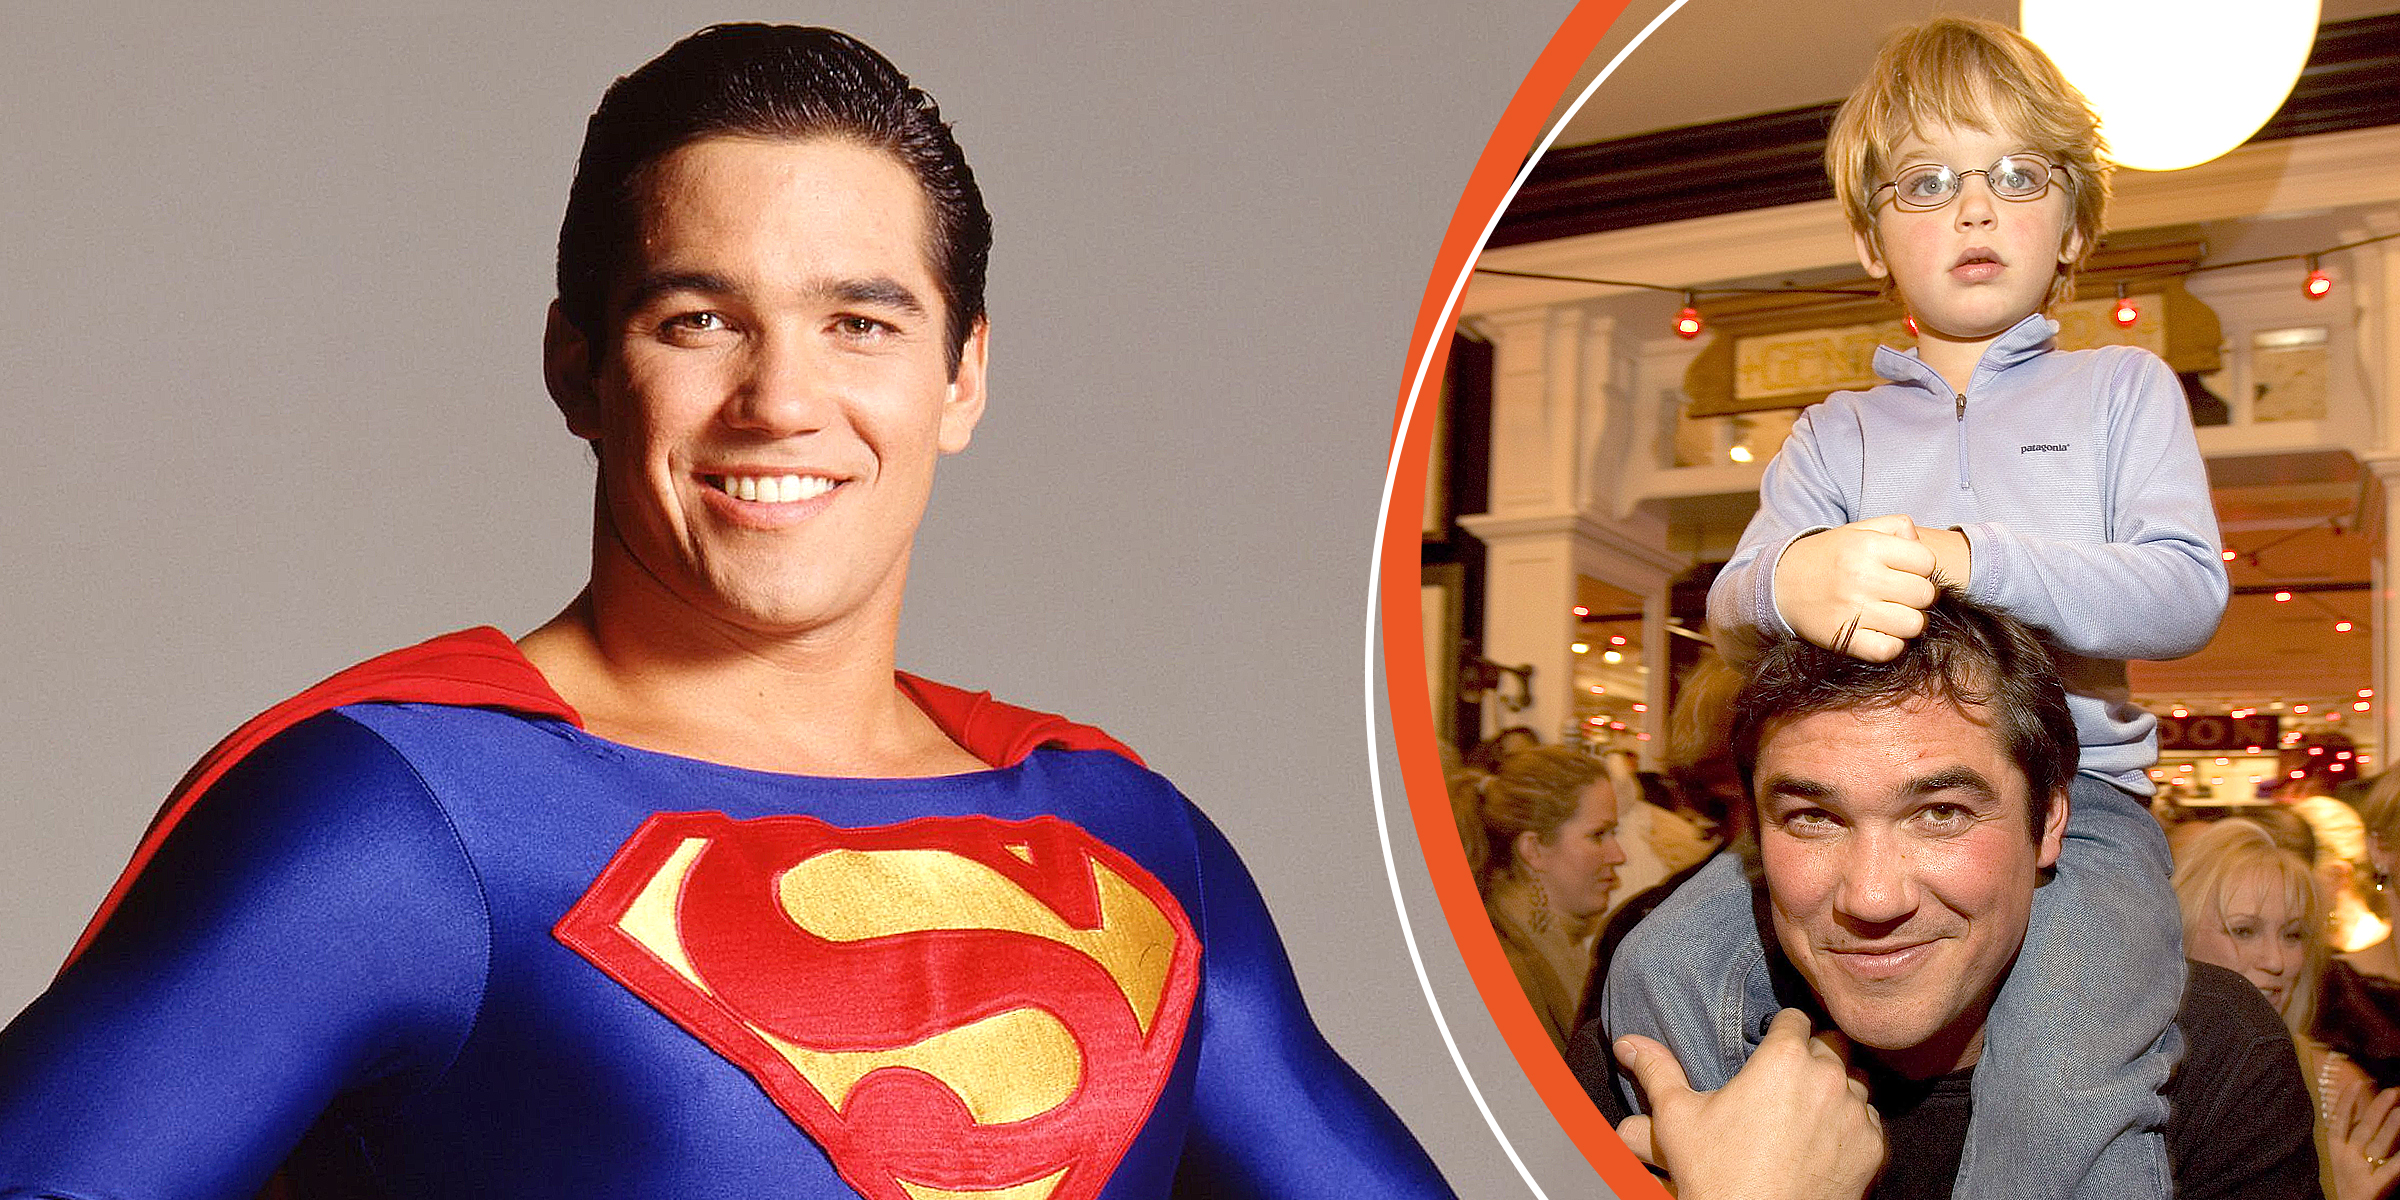 Dean Cain as Superman | Christopher Cain and Dean Cain | Source: Getty Images